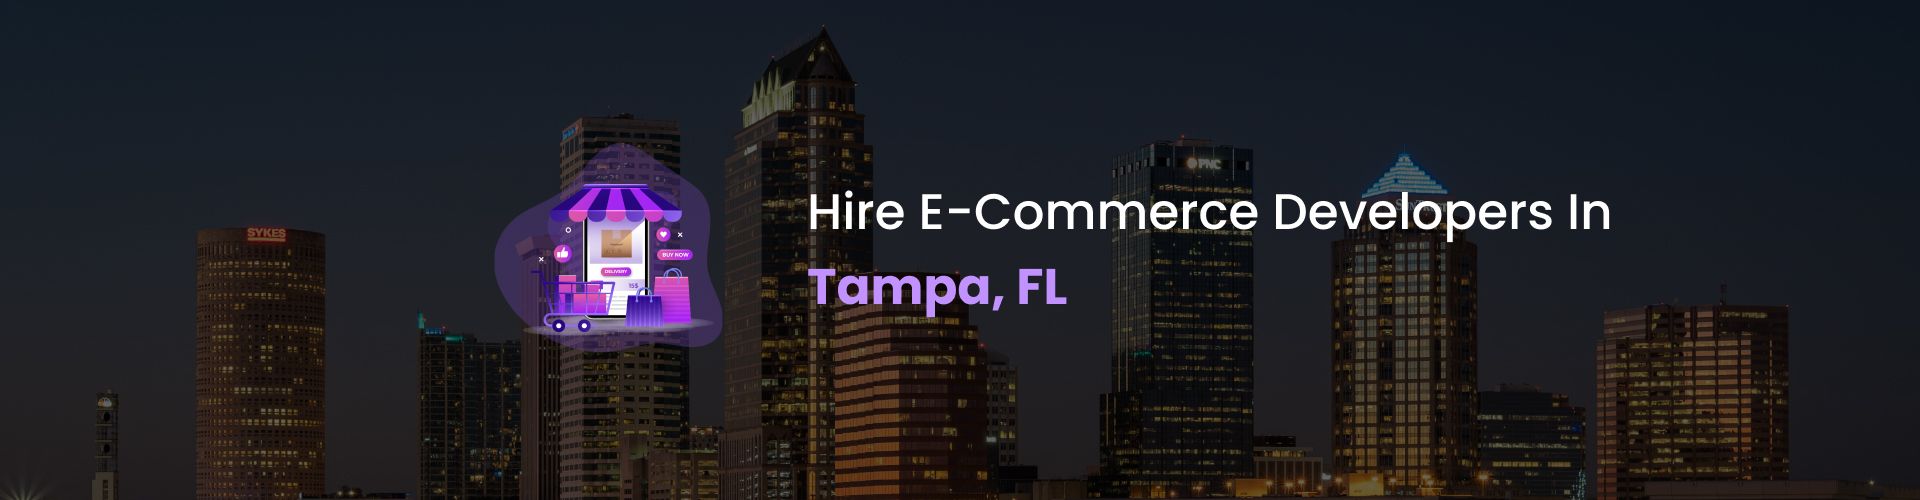 hire ecommerce developers in tamps, fl